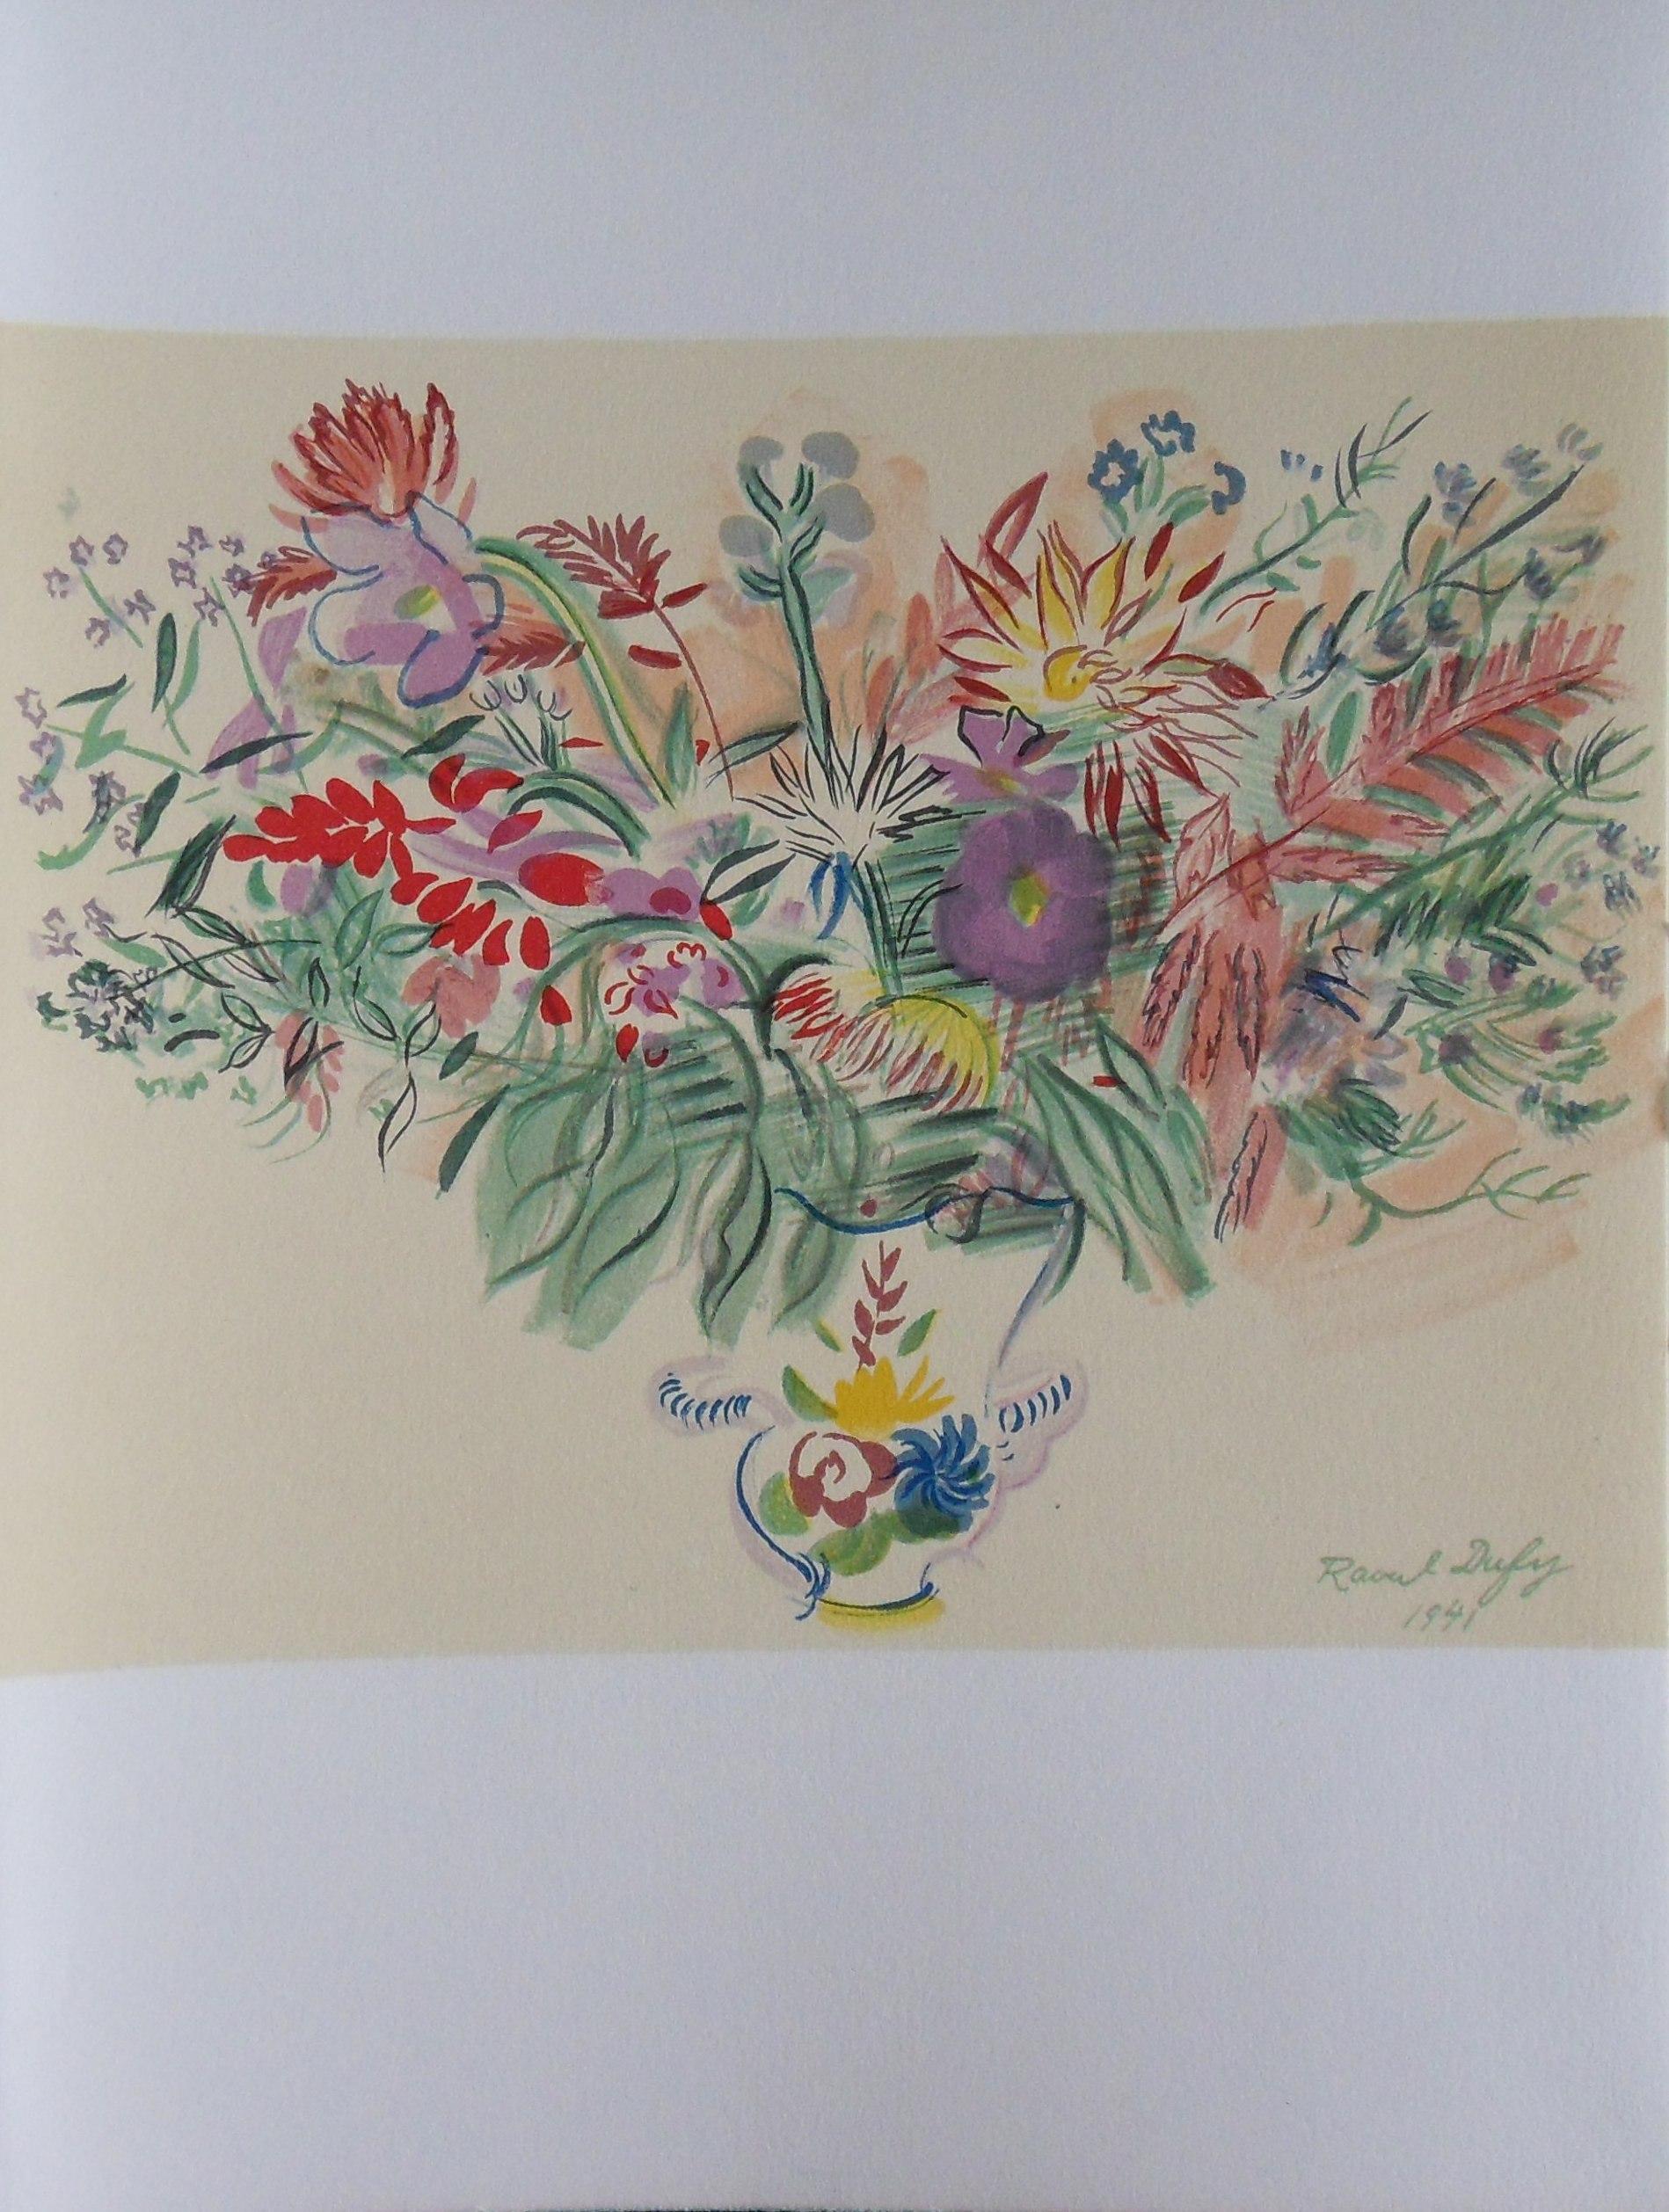 Raoul Dufy Still-Life Print - Colorful Bouquet of Flowers - Original lithograph - 1965